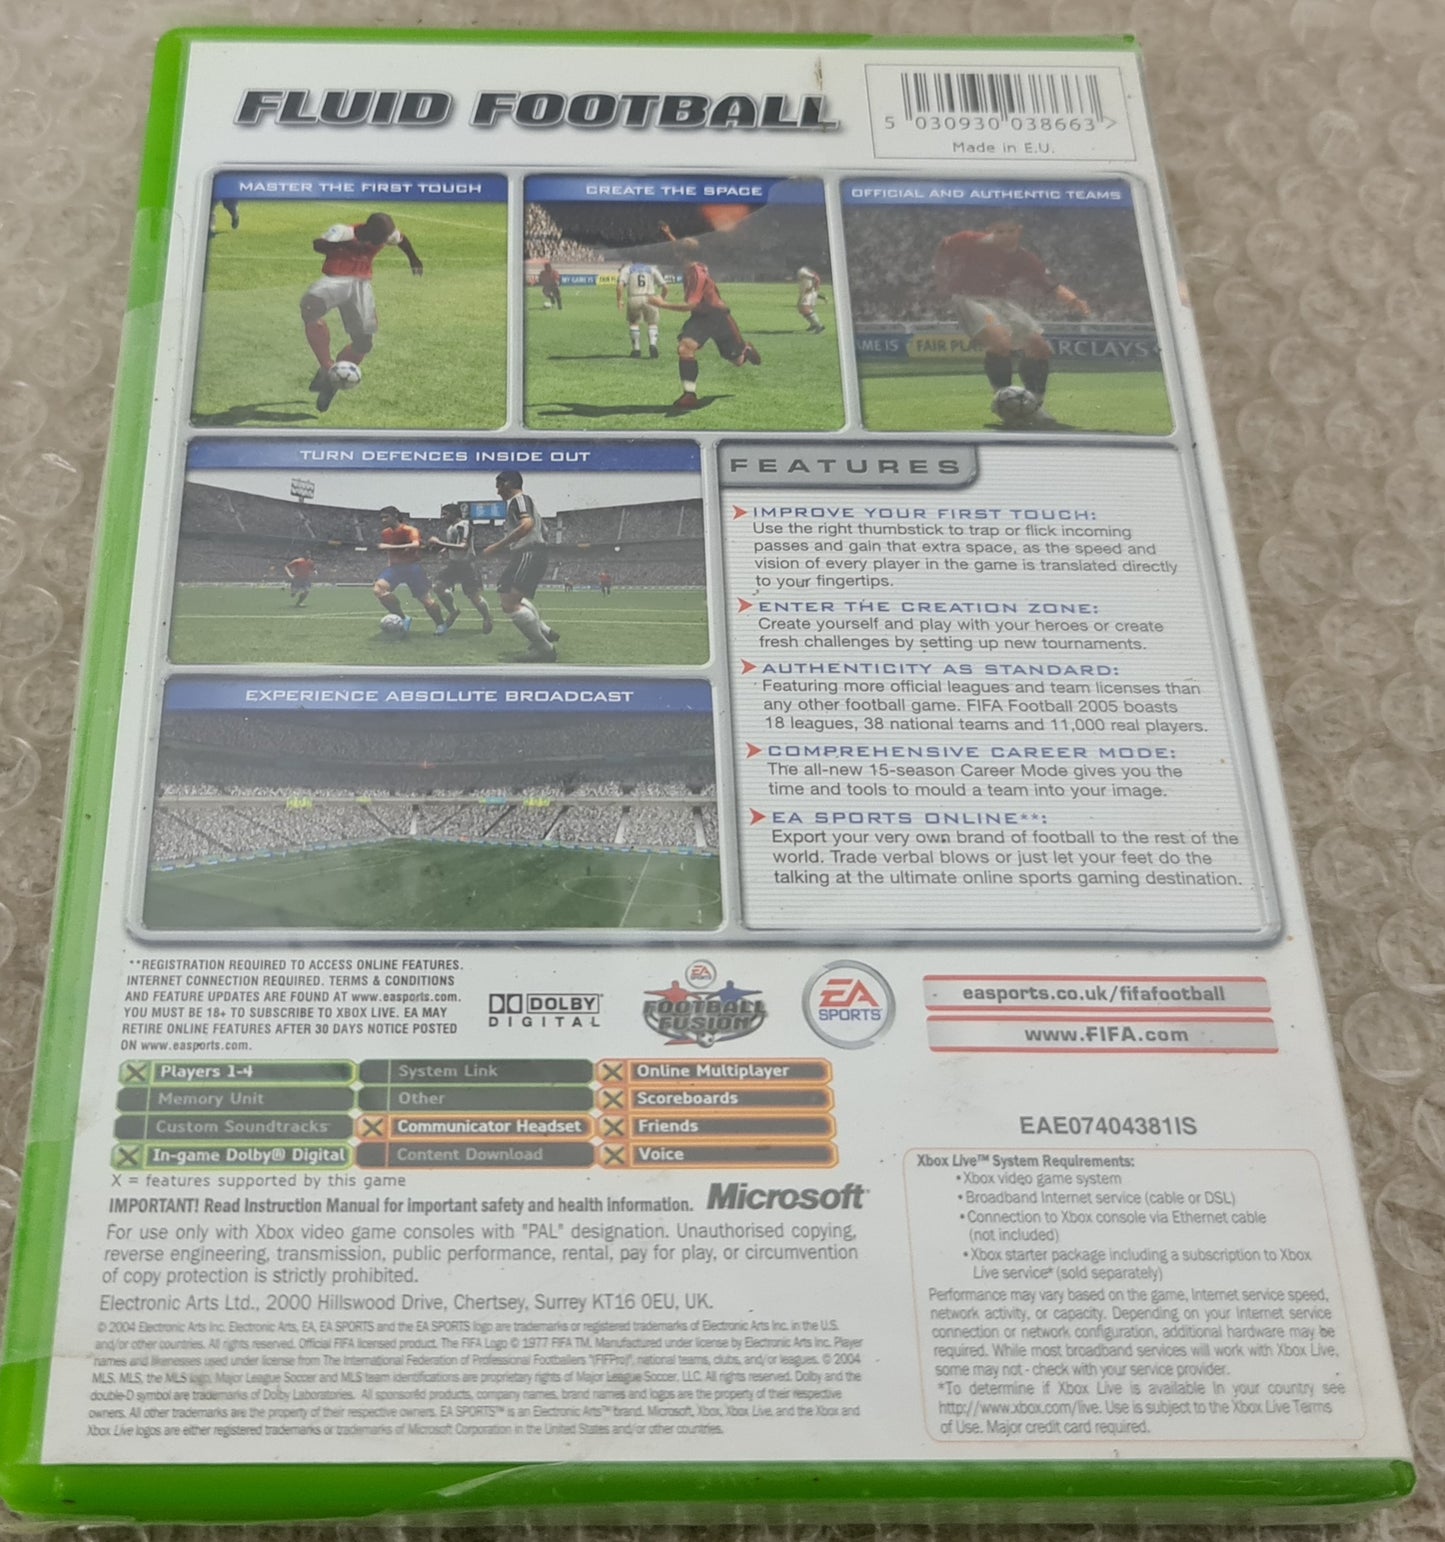 Brand New and Sealed FIFA 2005 Microsoft Xbox Game